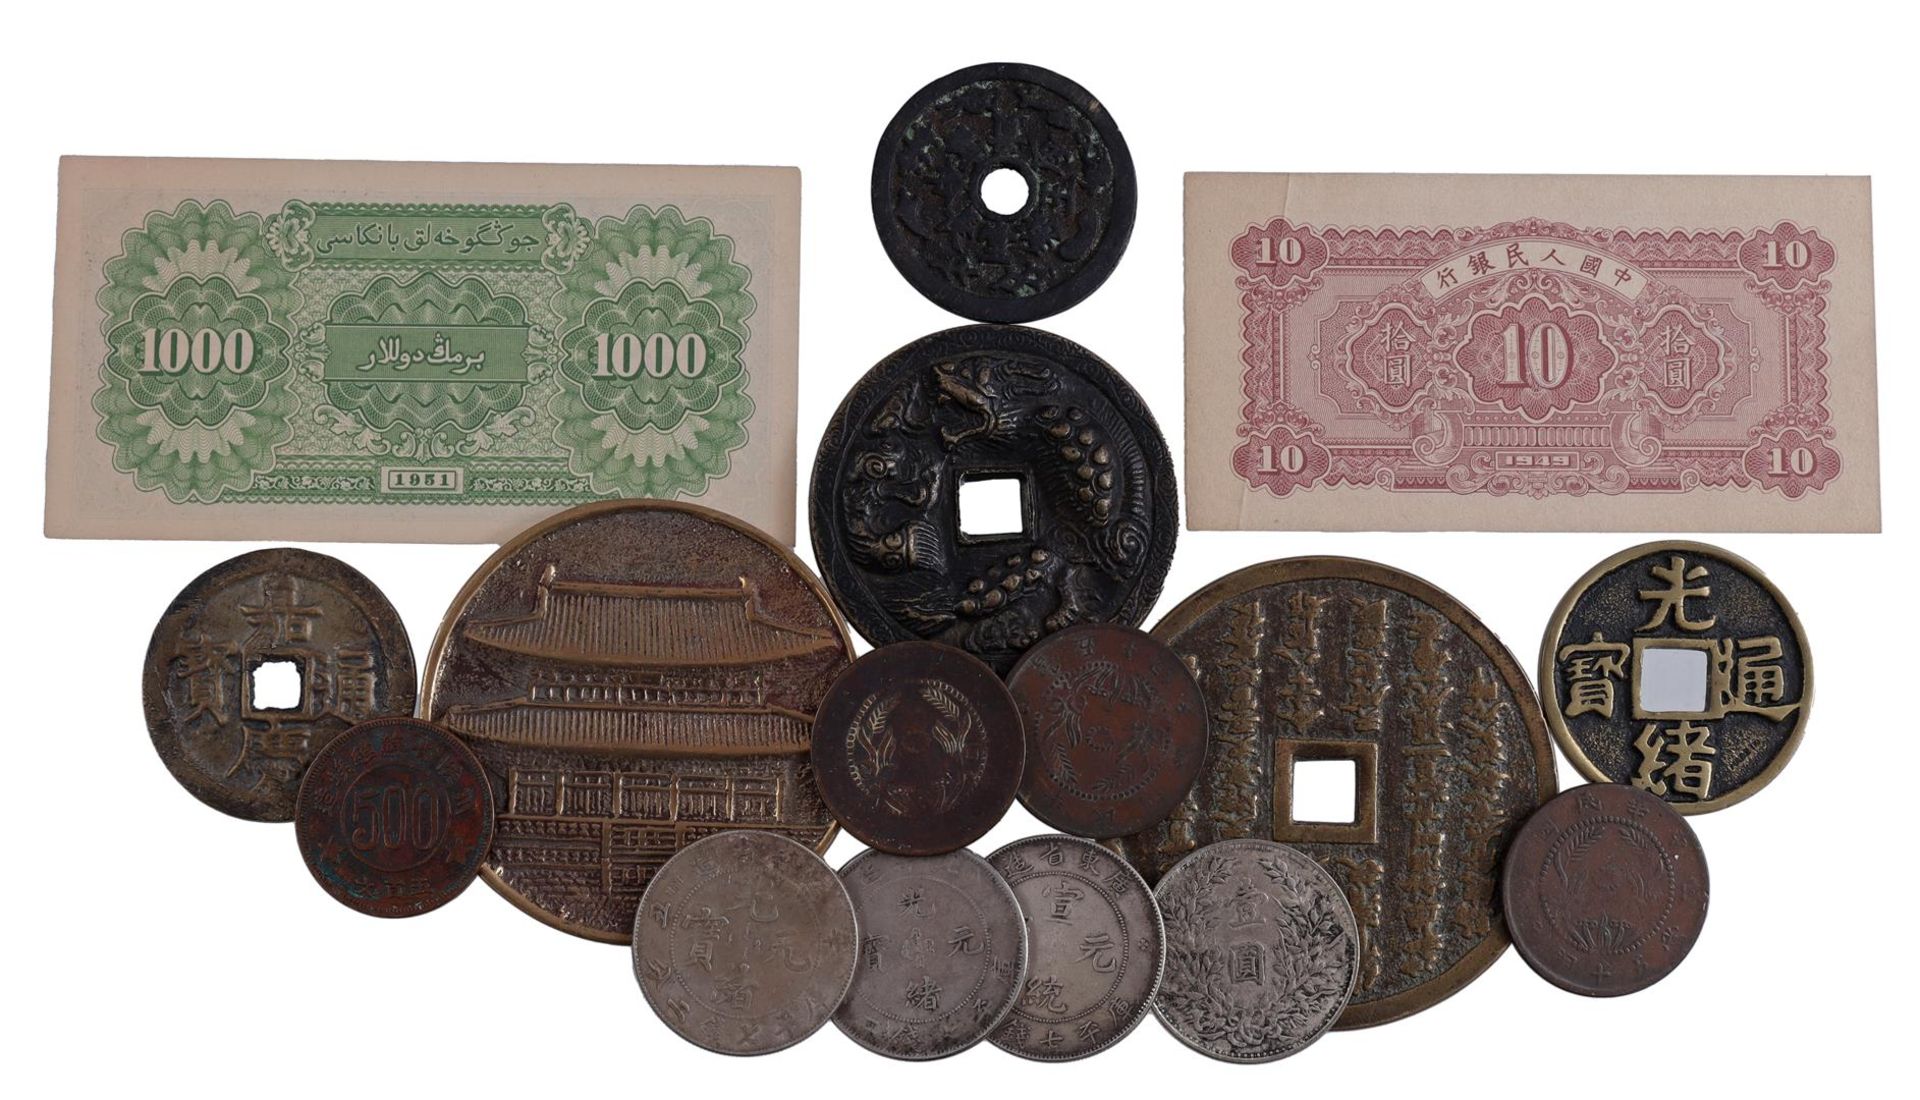 Lot of Chinese banknotes and coins - Image 2 of 2